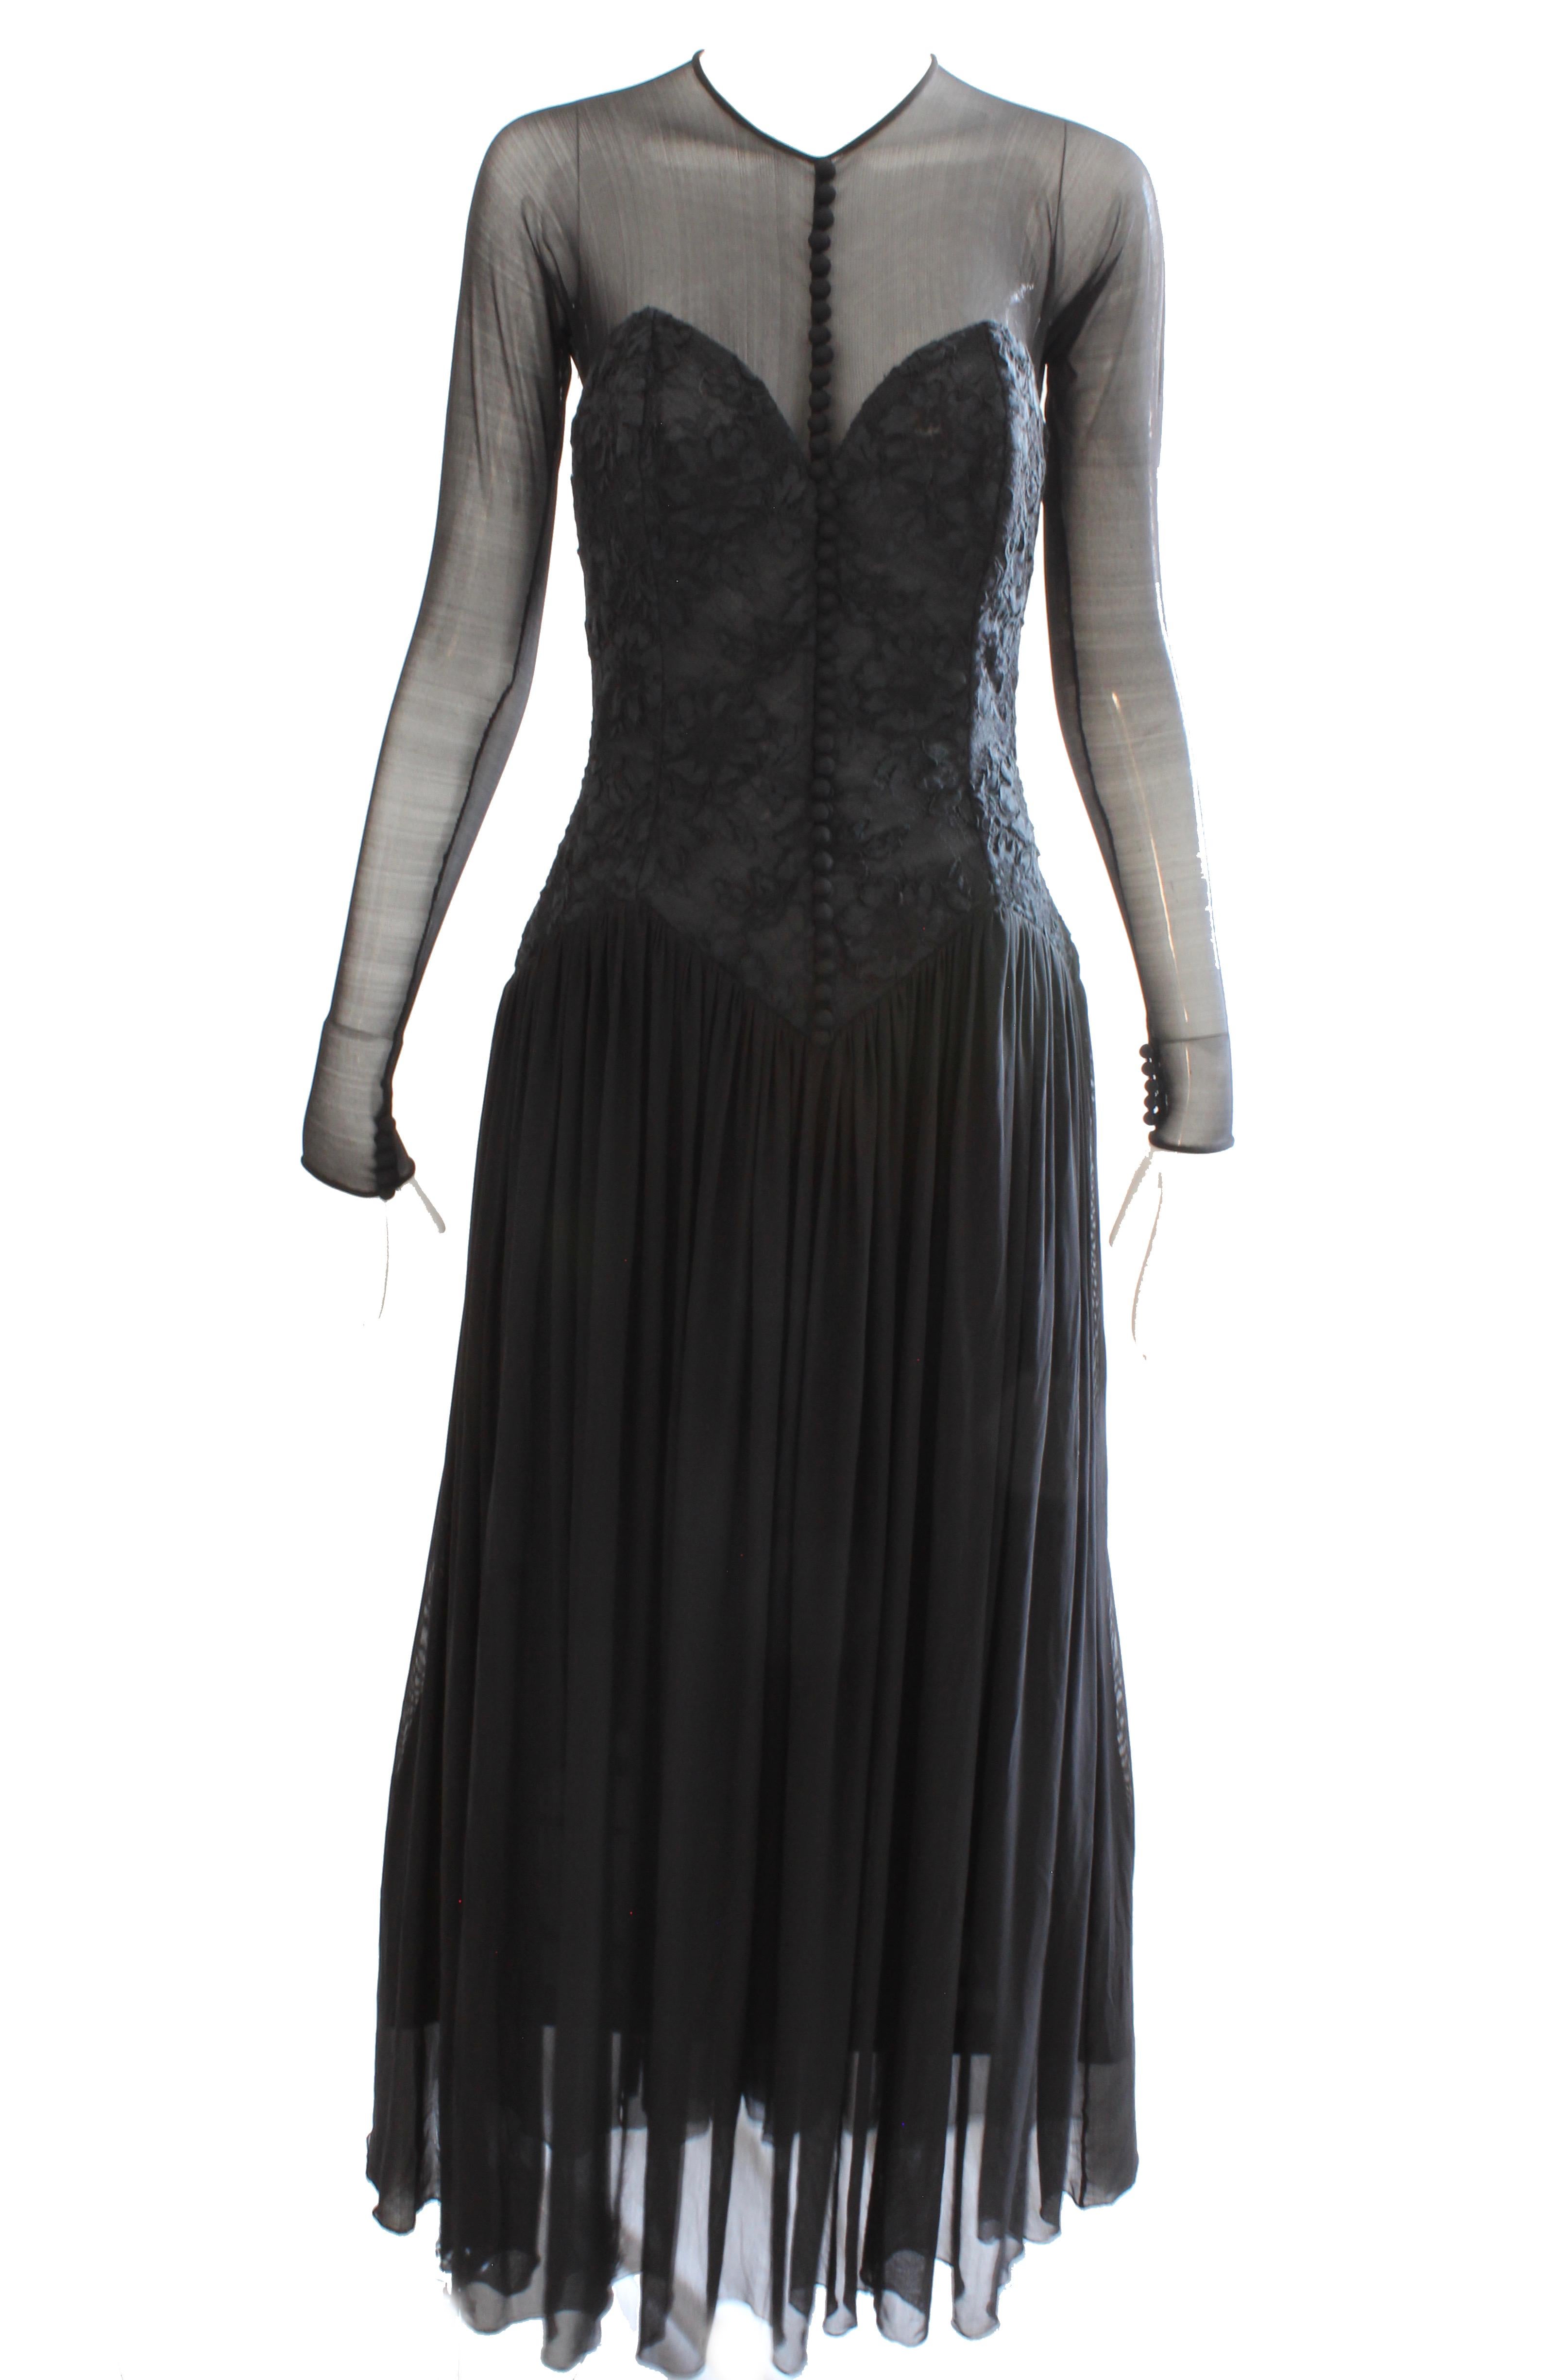 Here's a pretty formal dress from Vicky Tiel Couture, likely made in the 1990s.   It features a corset top with floral embroidery and sheer sleeves and chest, with panels of black mesh as the skirt.  Fastens in back with a zipper and single button